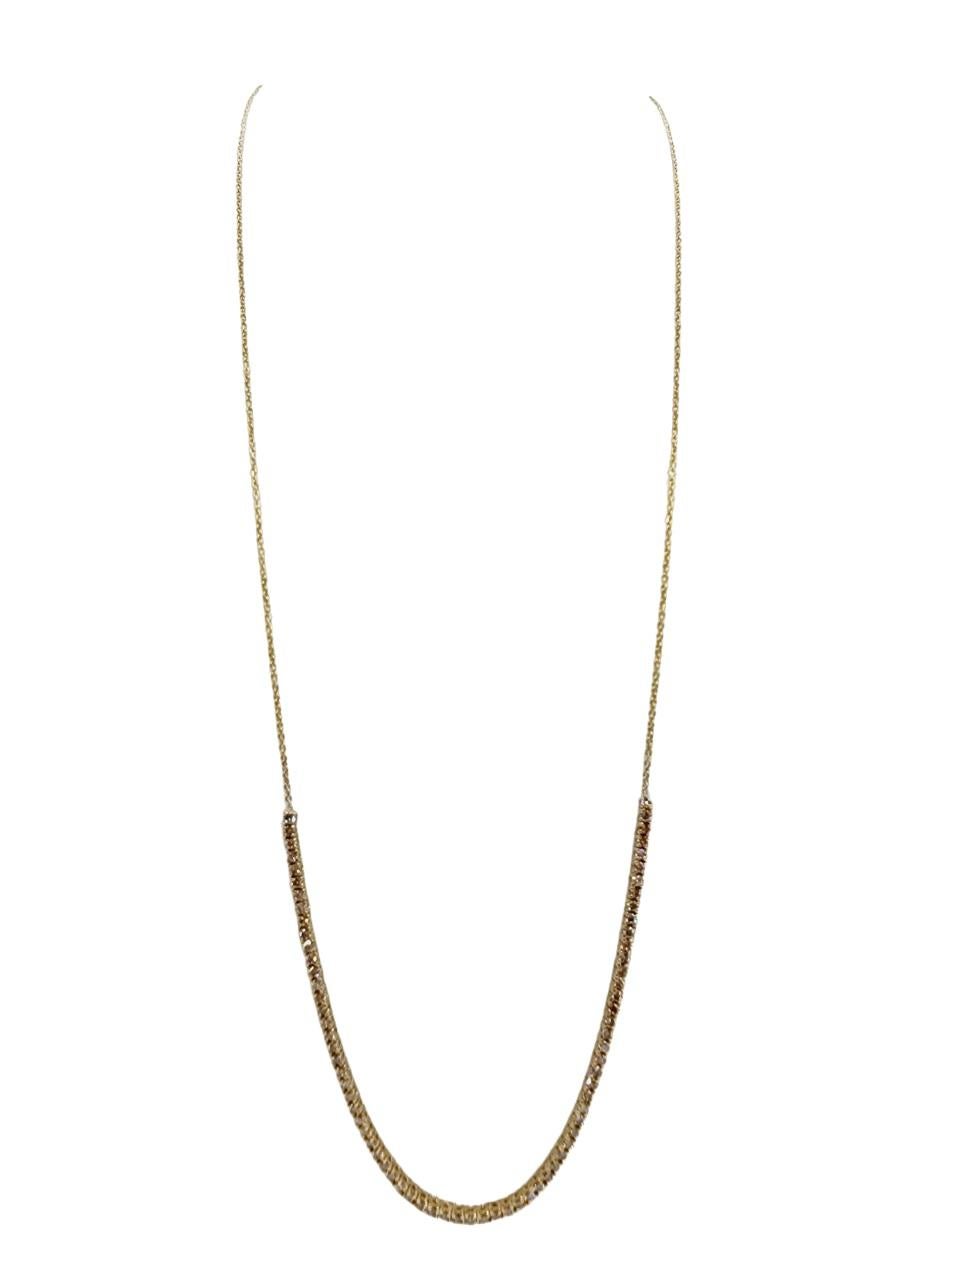 1.65 Carat Mini Diamond Necklace Chain 14 Karat Yellow Gold 16'' In New Condition For Sale In Great Neck, NY